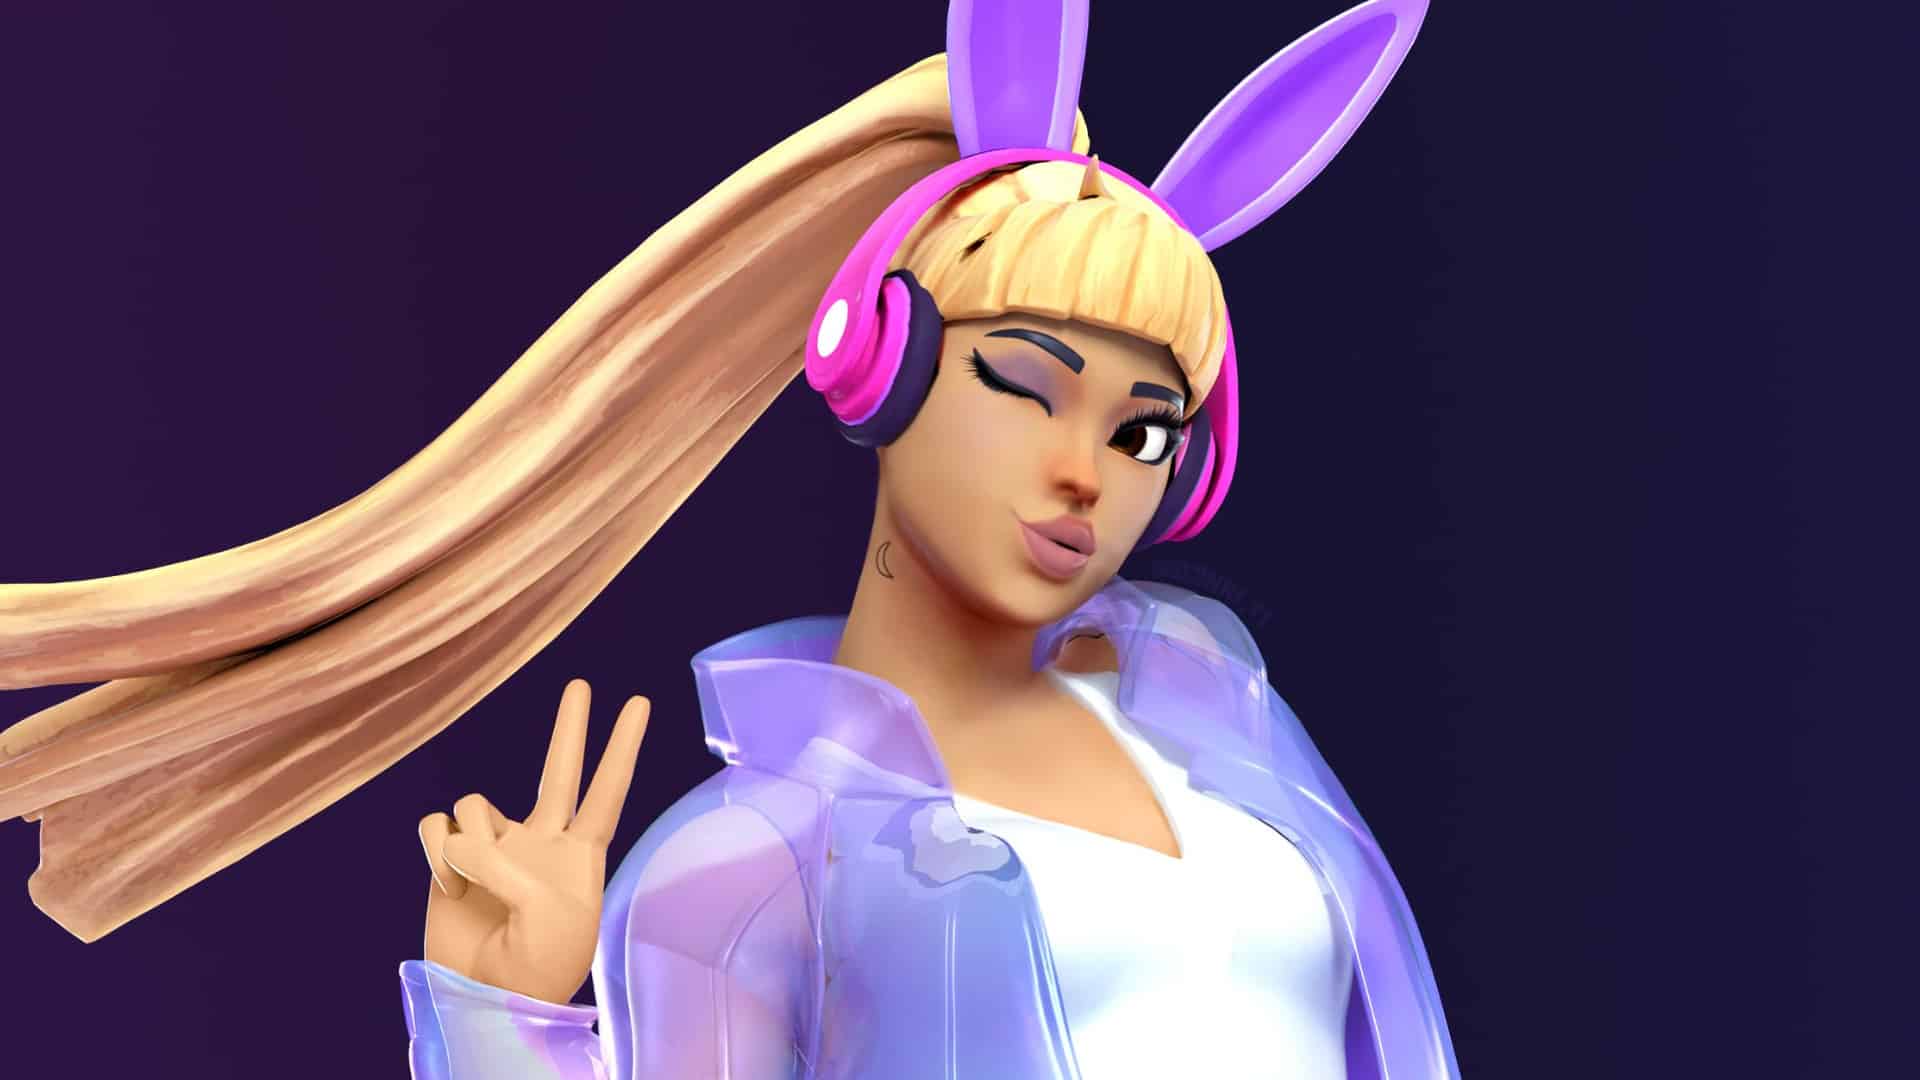 Fortnite Fans And Their Icon Skin Concepts Of Famous Fortnite Streamers